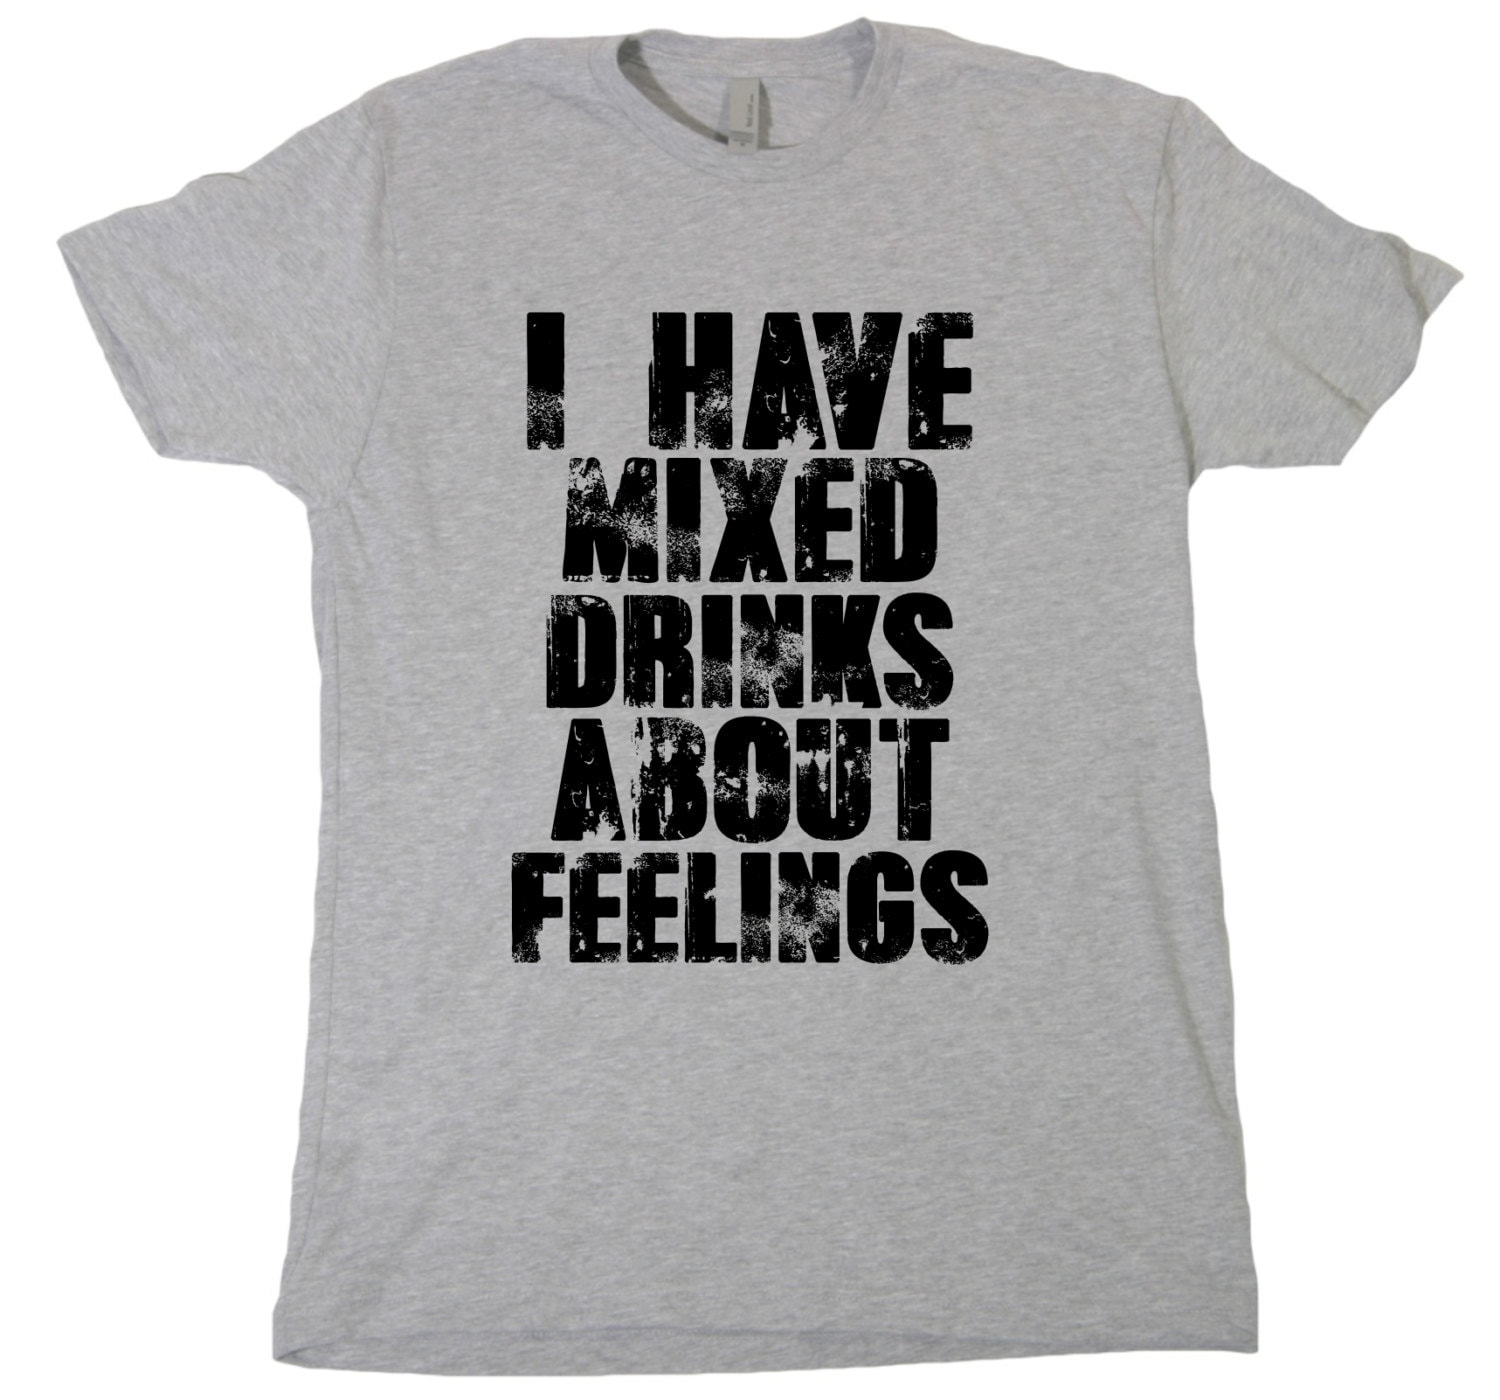 I Have Mixed Drinks About Feelings Tshirt Funny Humor Shirt